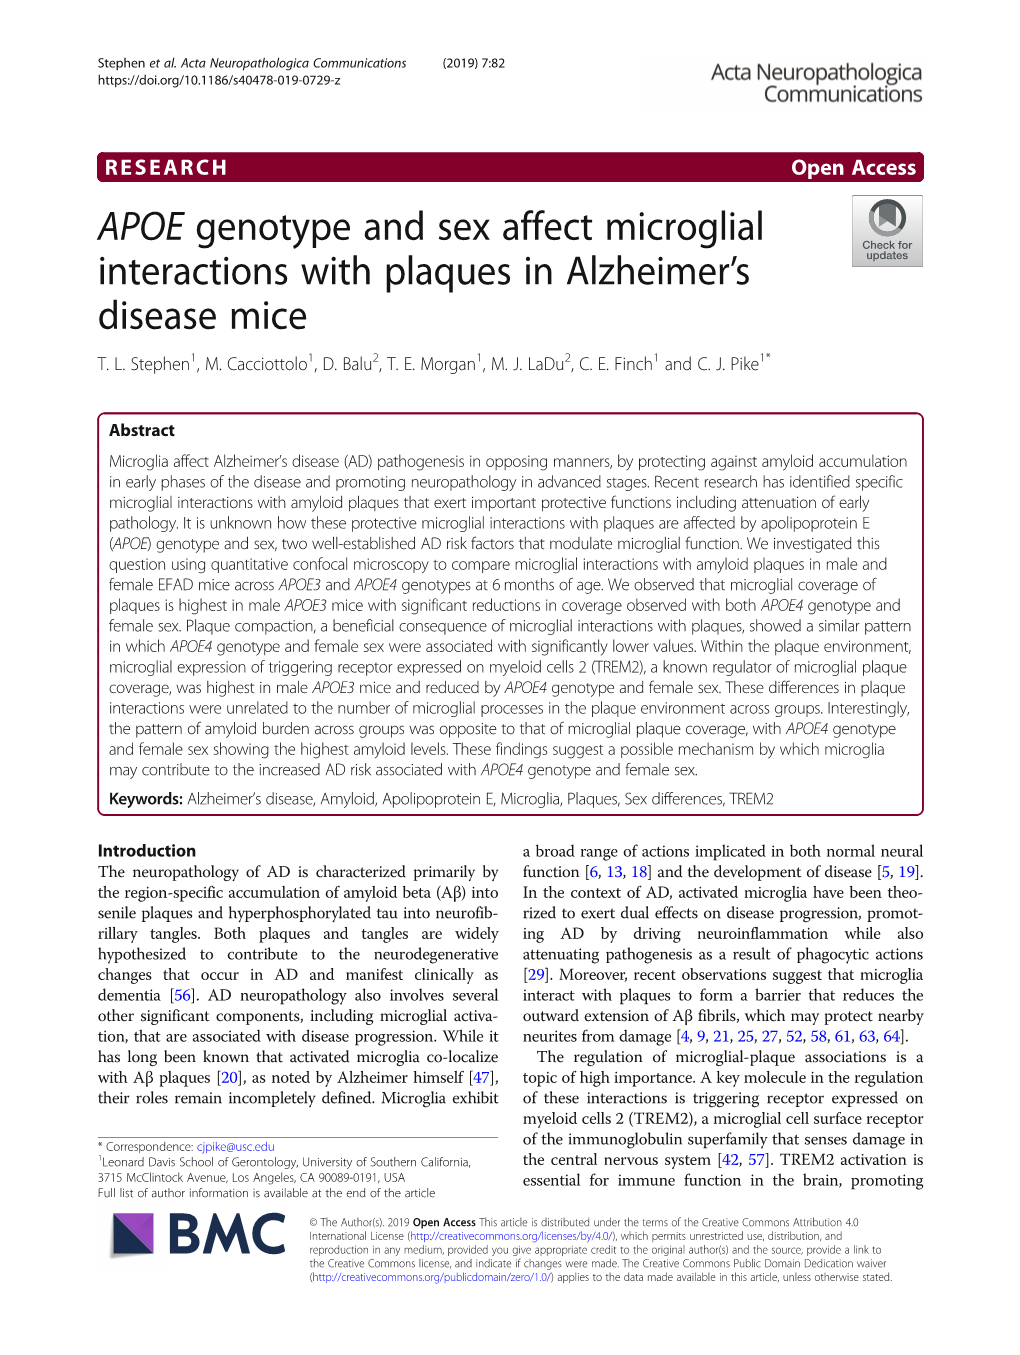 APOE Genotype and Sex Affect Microglial Interactions with Plaques in Alzheimer’S Disease Mice T